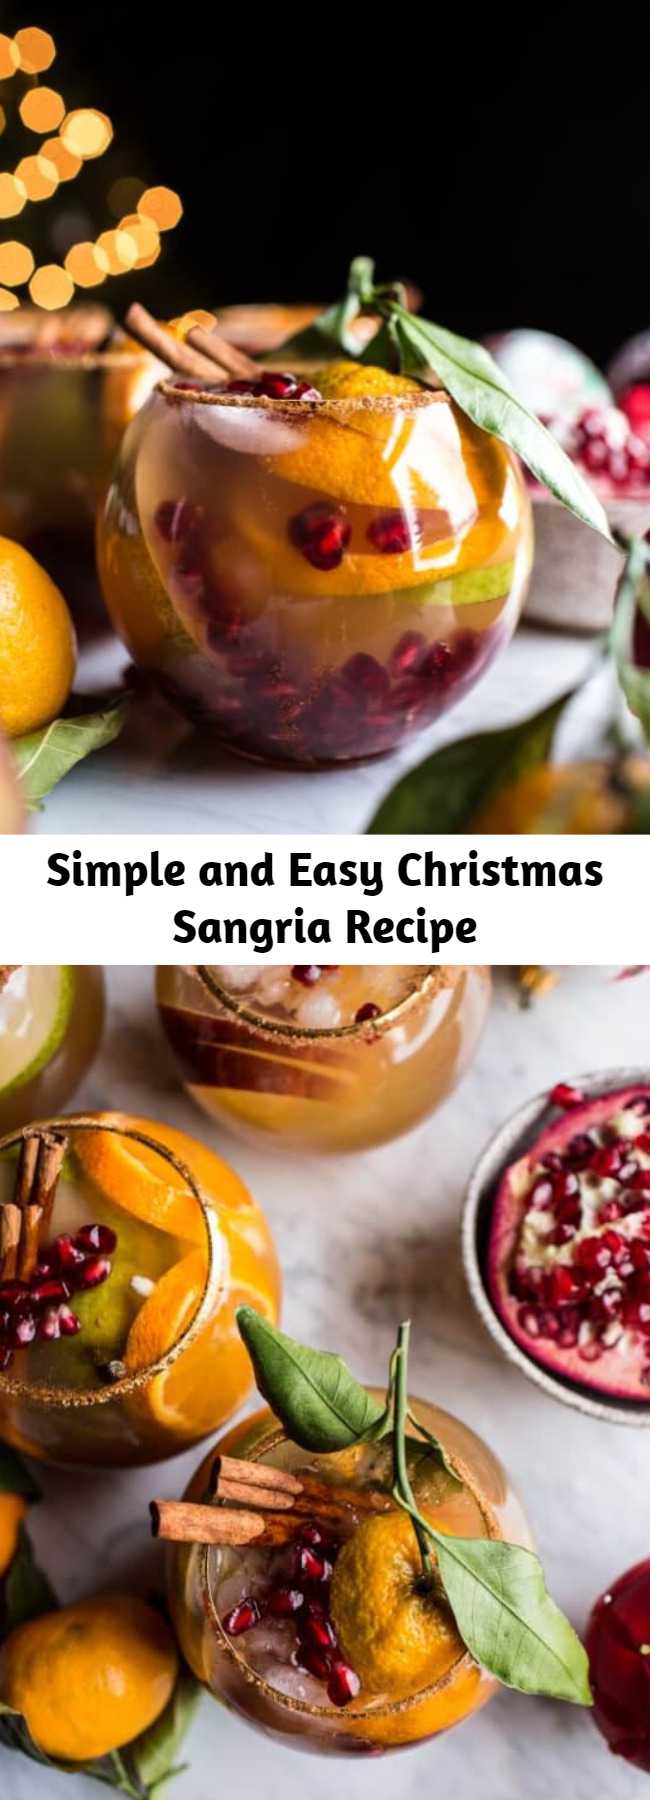 Simple and Easy Christmas Sangria Recipe - It's got all the flavors of Christmas + a bottle of wine. And totally pretty! Perfect for your holiday parties!! Bring on the holiday entertaining!